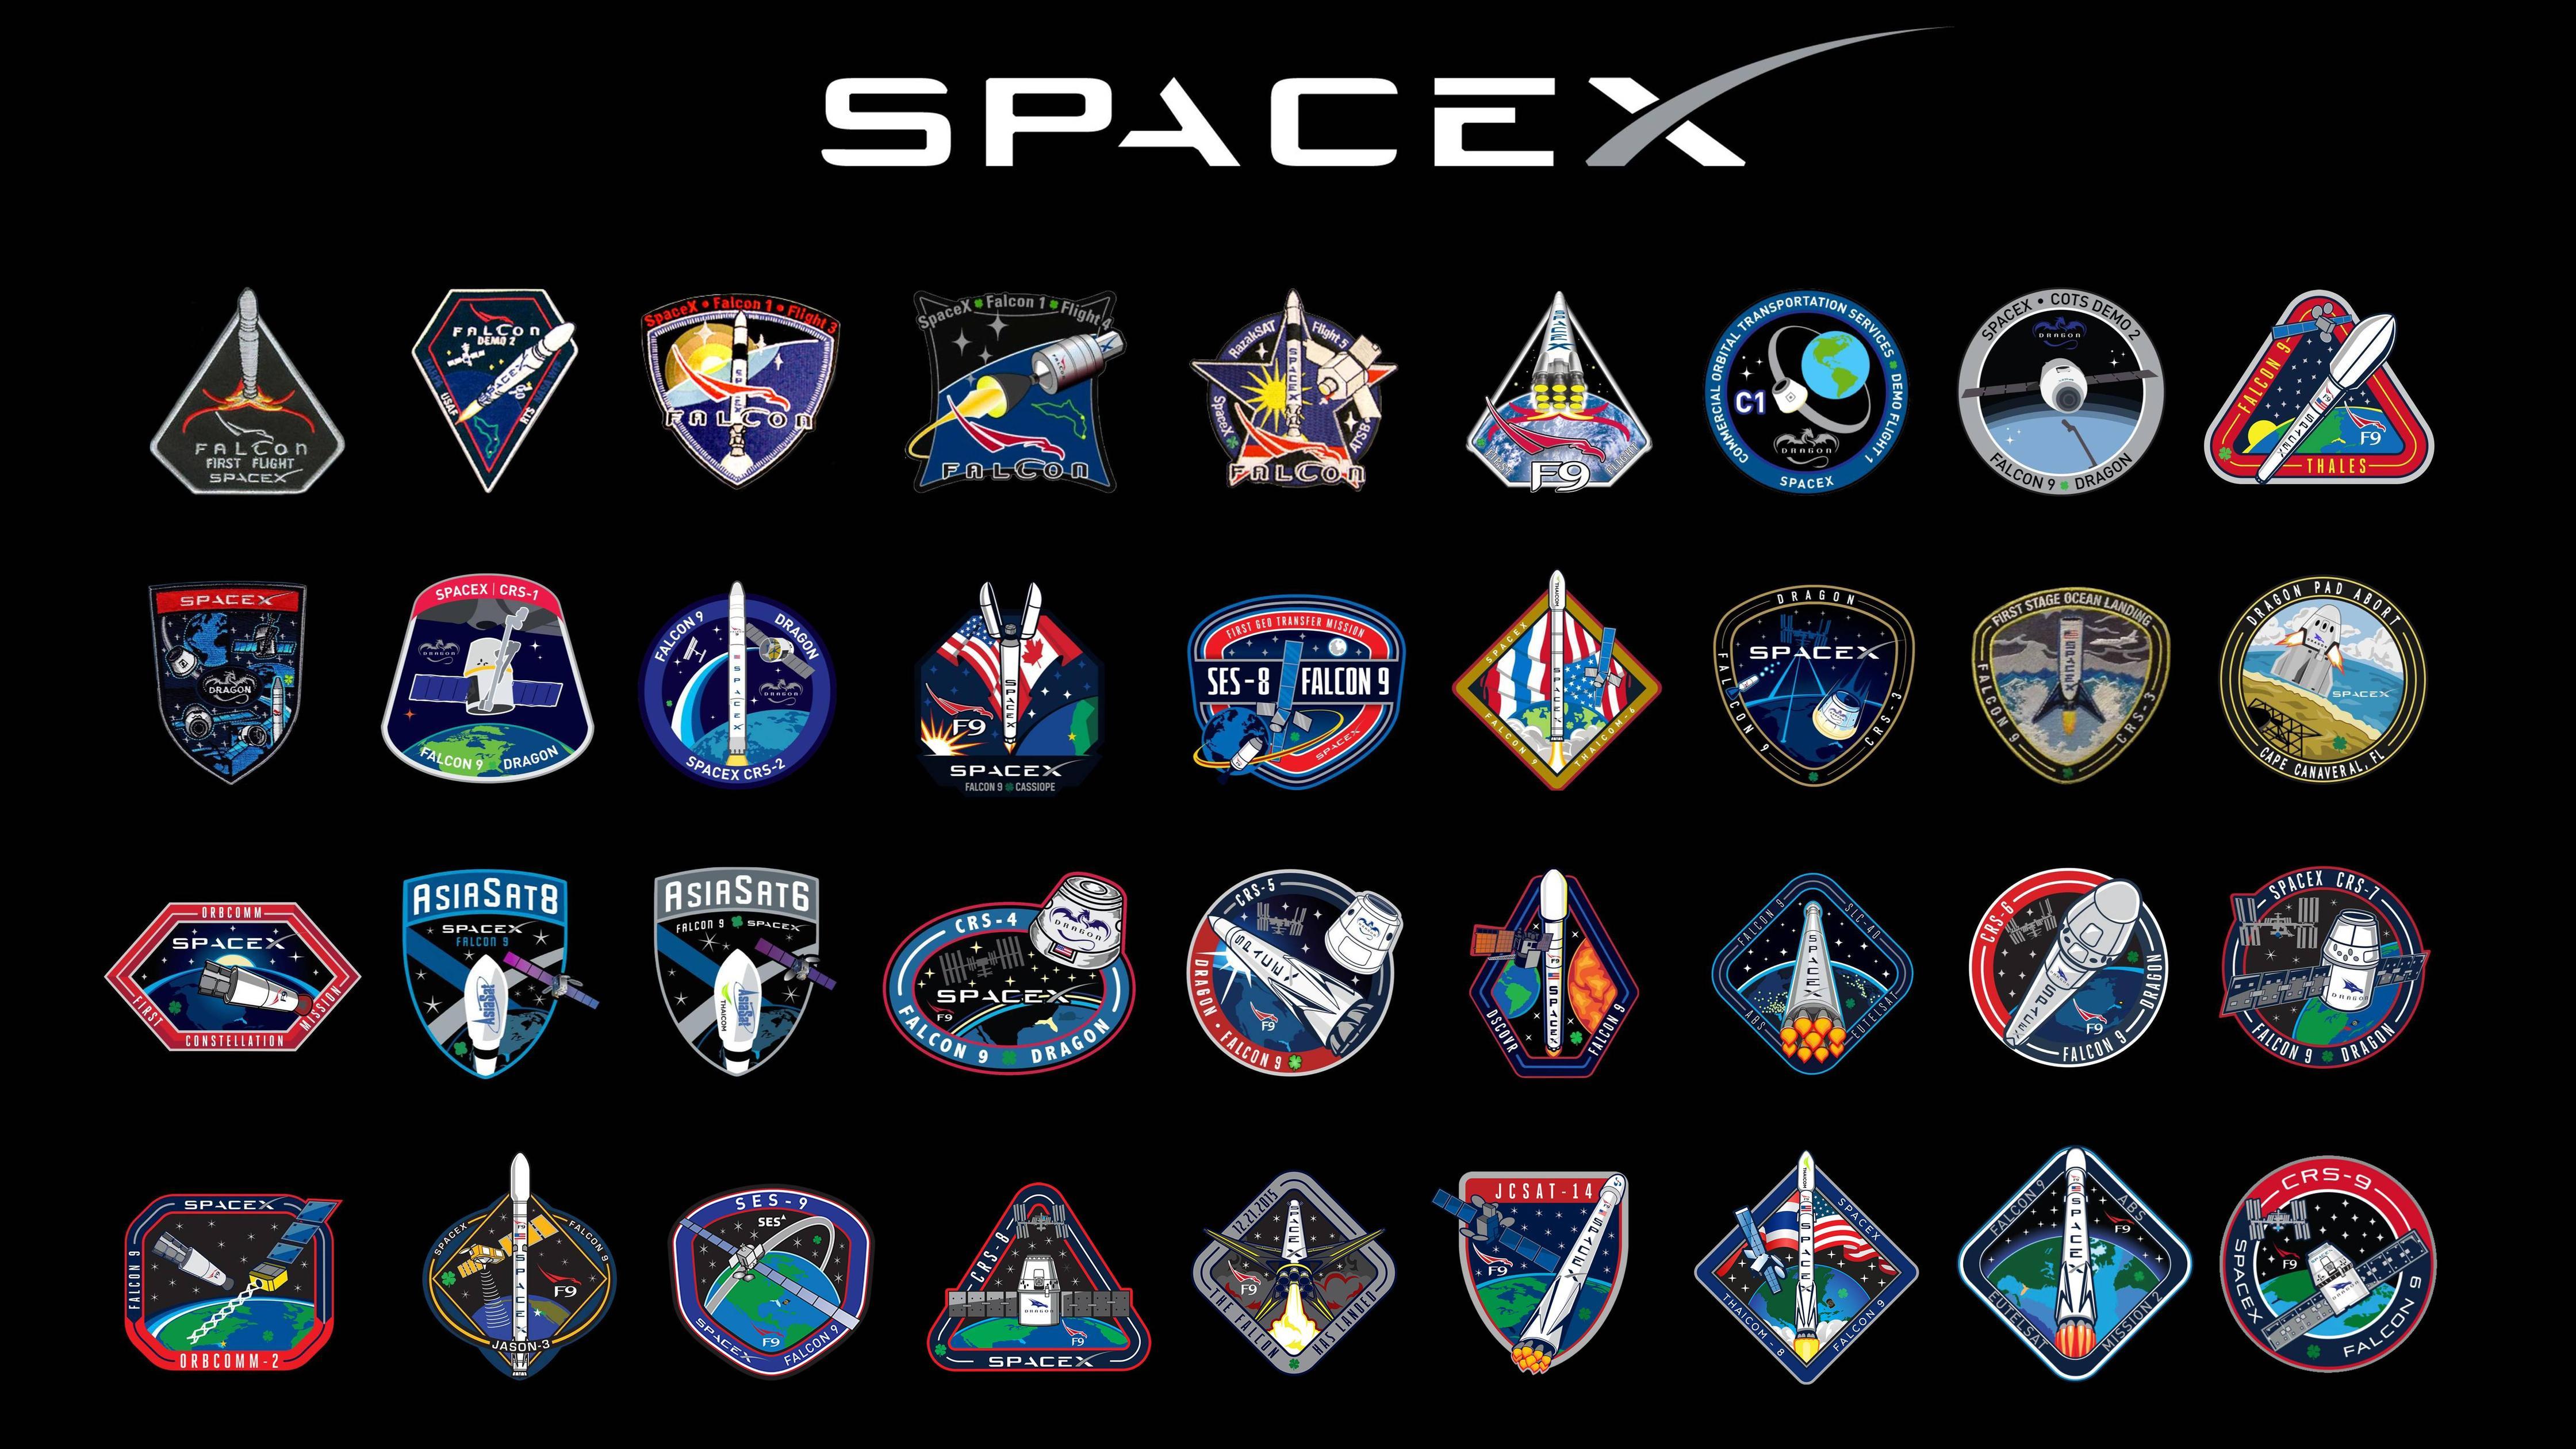 Falcon 9 Logo - SpaceX Mission Patch 16:9 Wallpaper : spacex